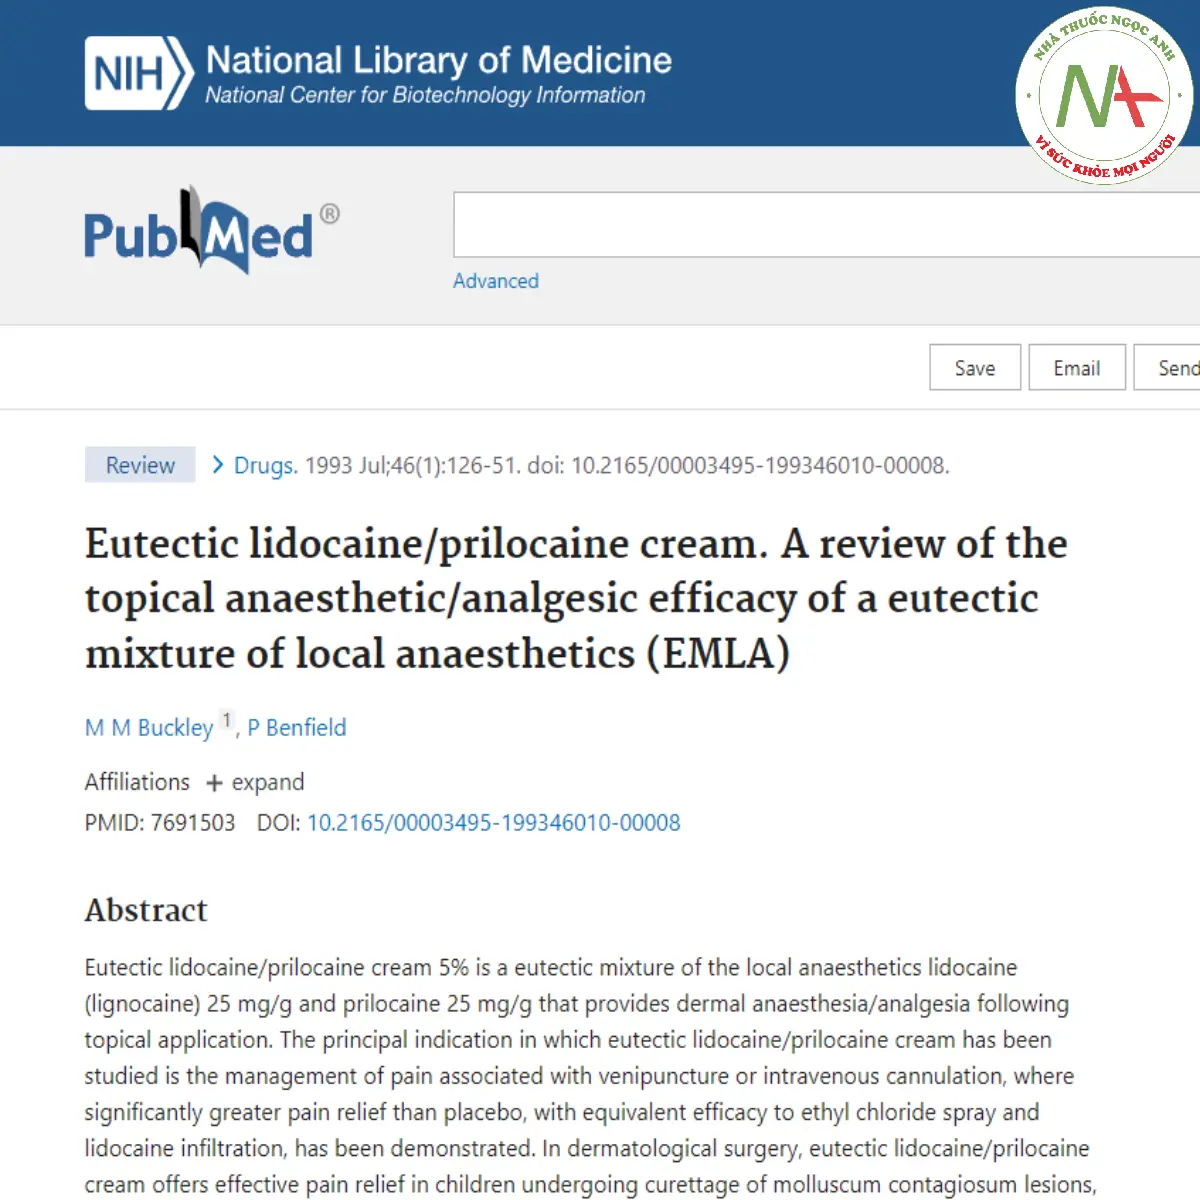 Eutectic lidocaine/prilocaine cream. A review of the topical anaesthetic/analgesic efficacy of a eutectic mixture of local anaesthetics (EMLA)